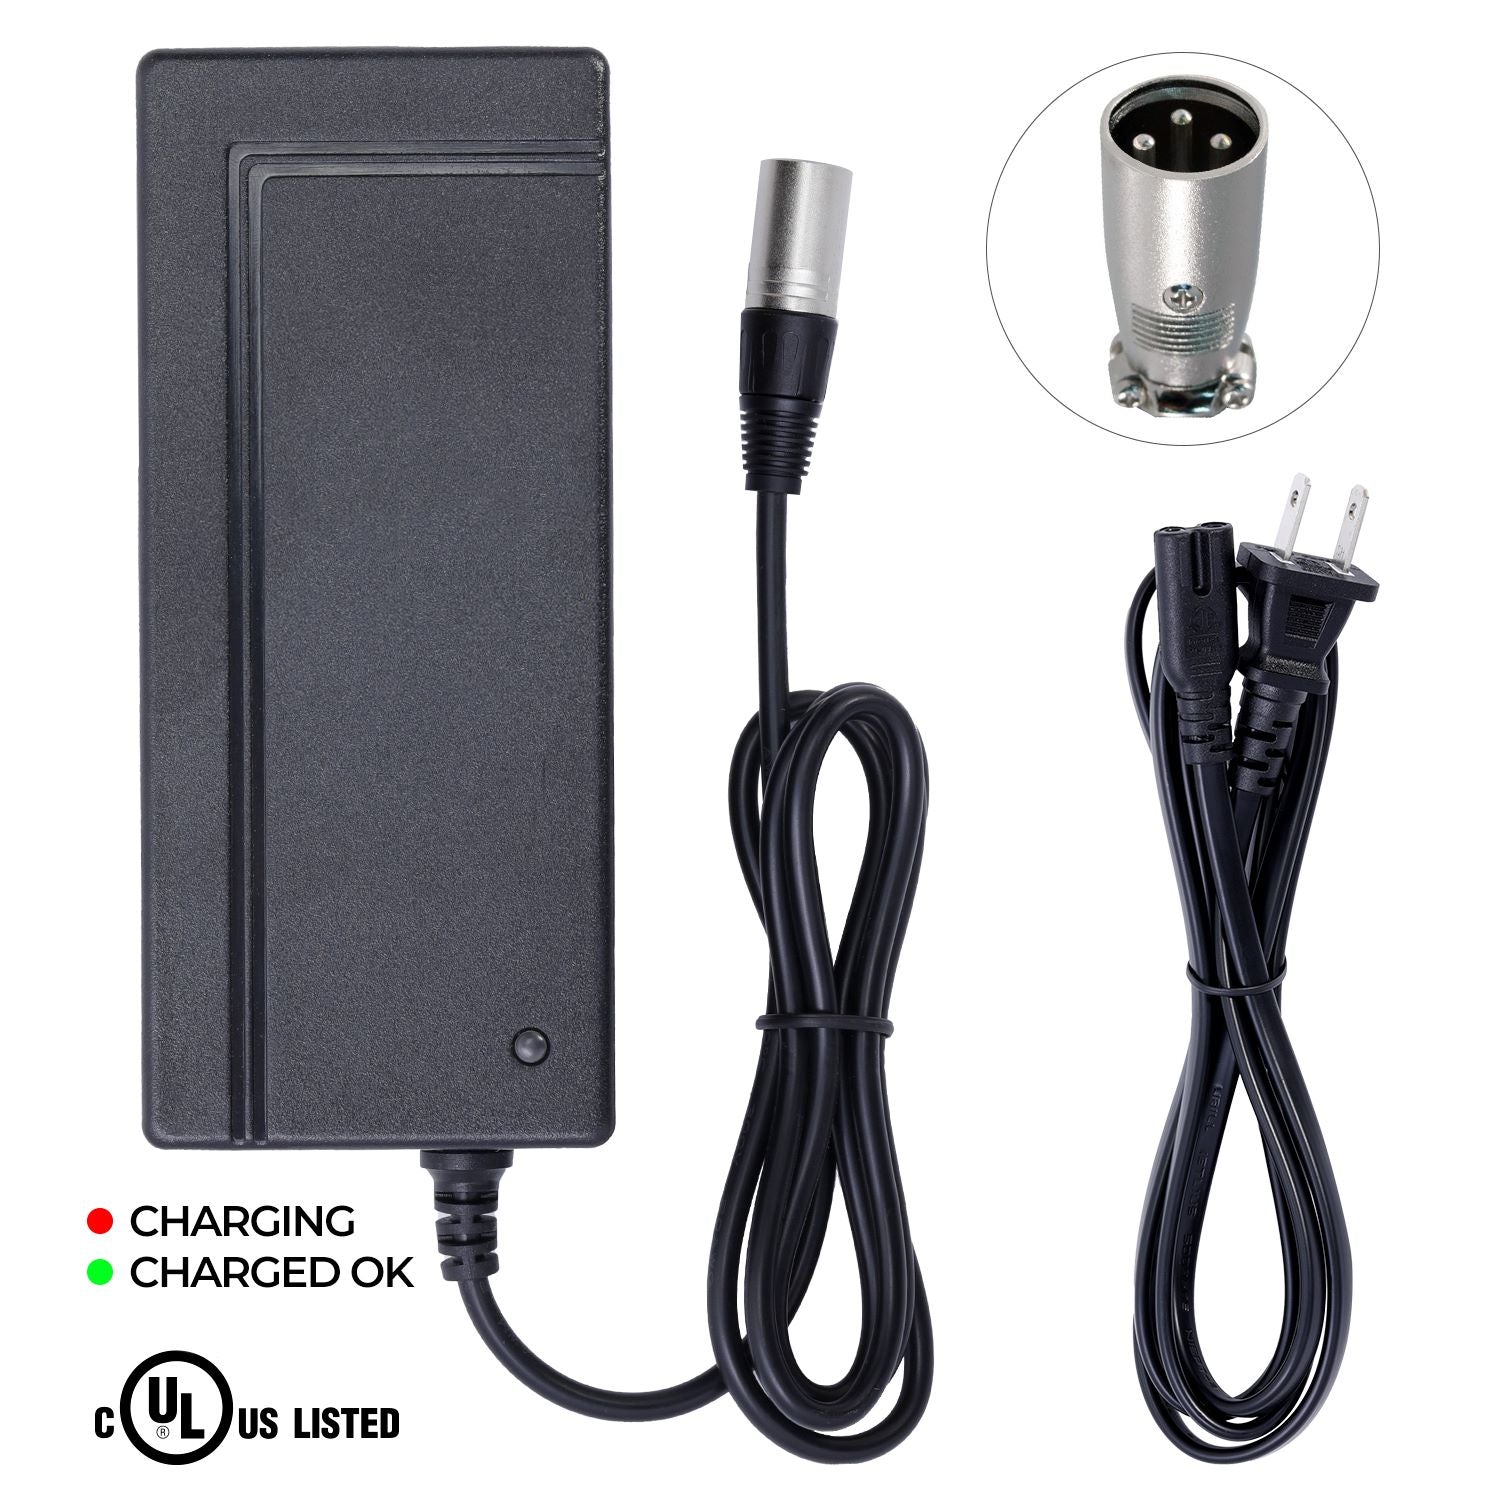 Charger for Shoprider Trooper Power Chair UL8W36